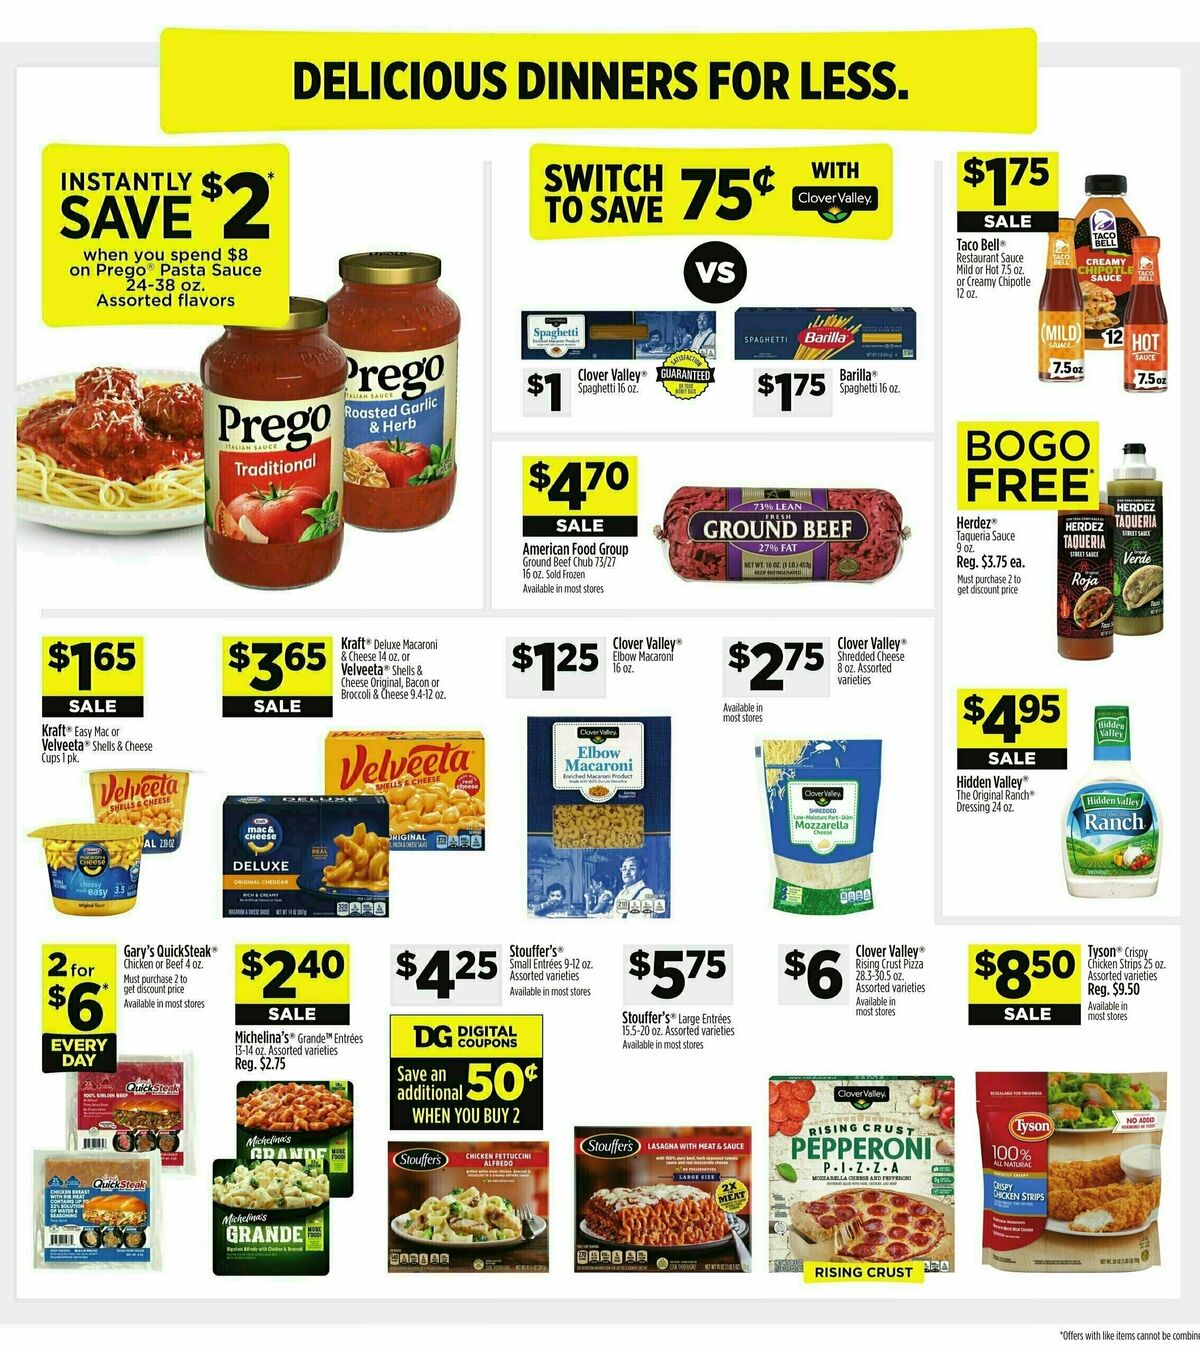 Dollar General Weekly Ad from December 10